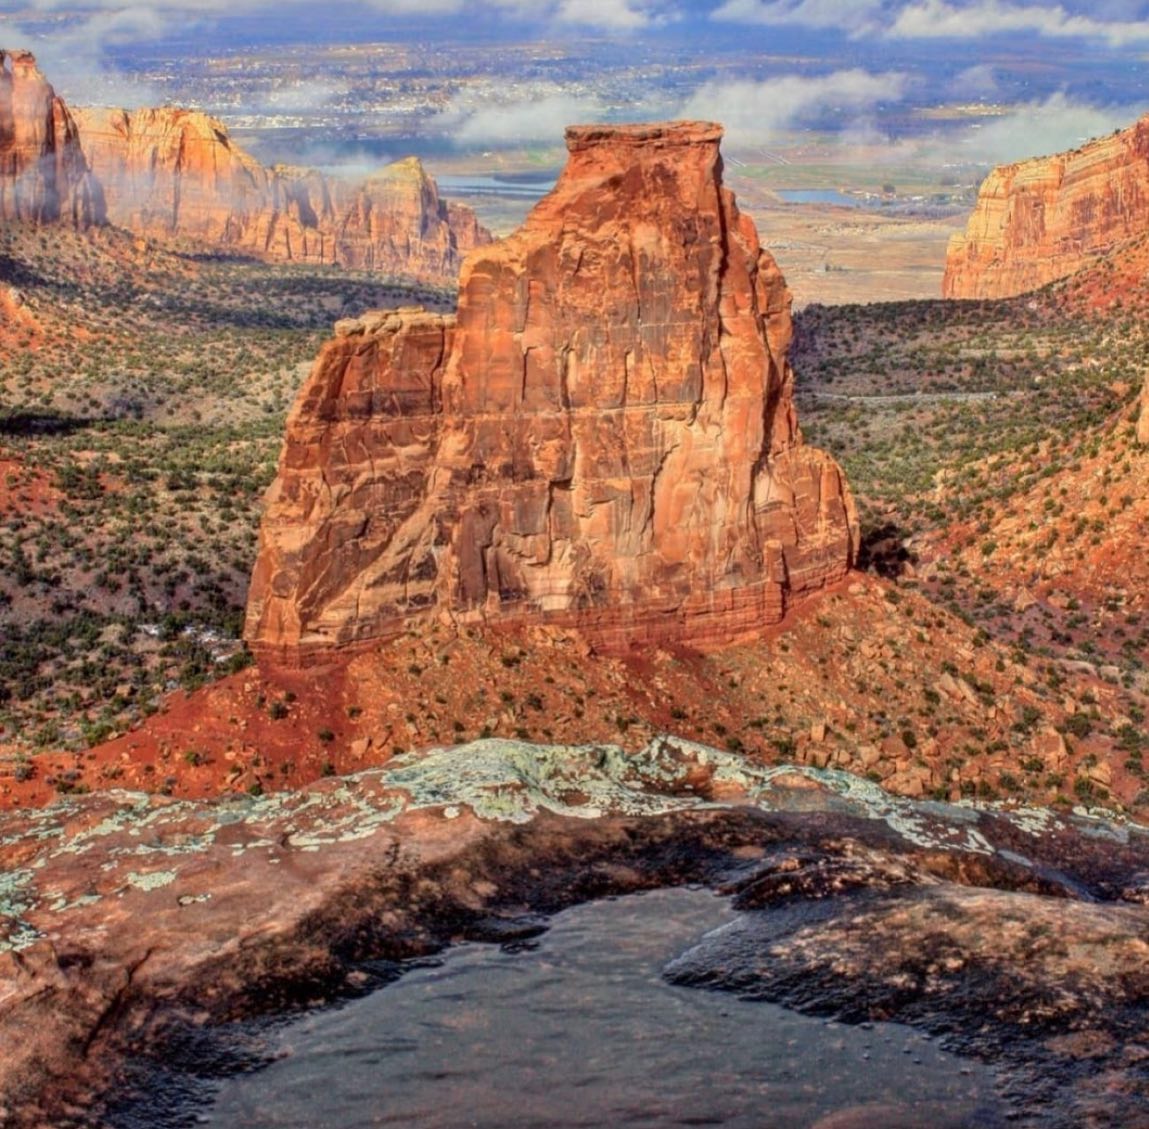 Breathtaking high desert canyons of the Colorado National Monument